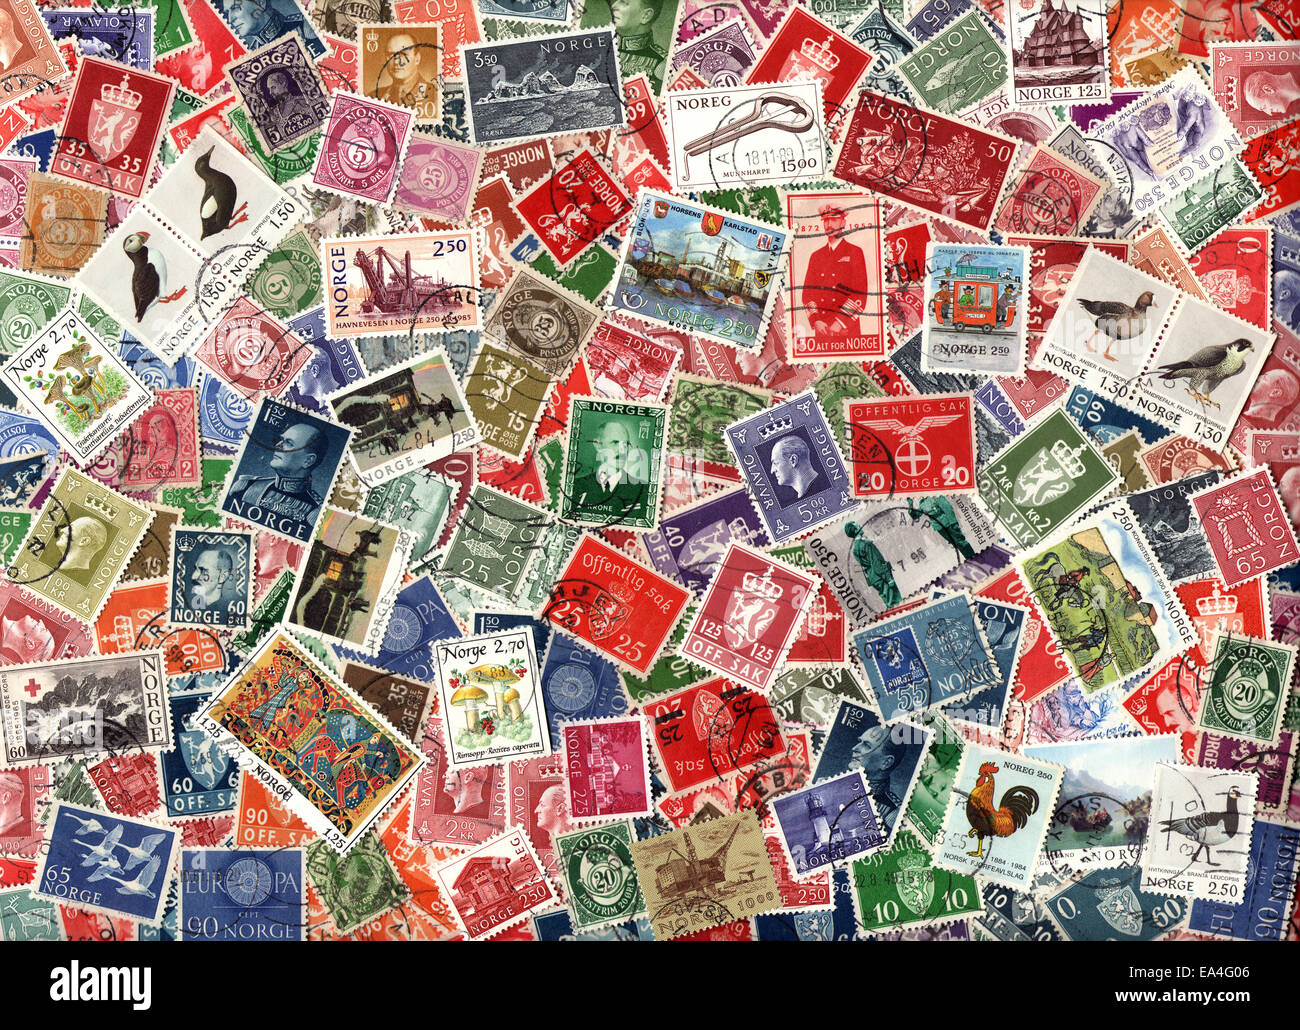 Background of the postage stamps issued in Norway Stock Photo